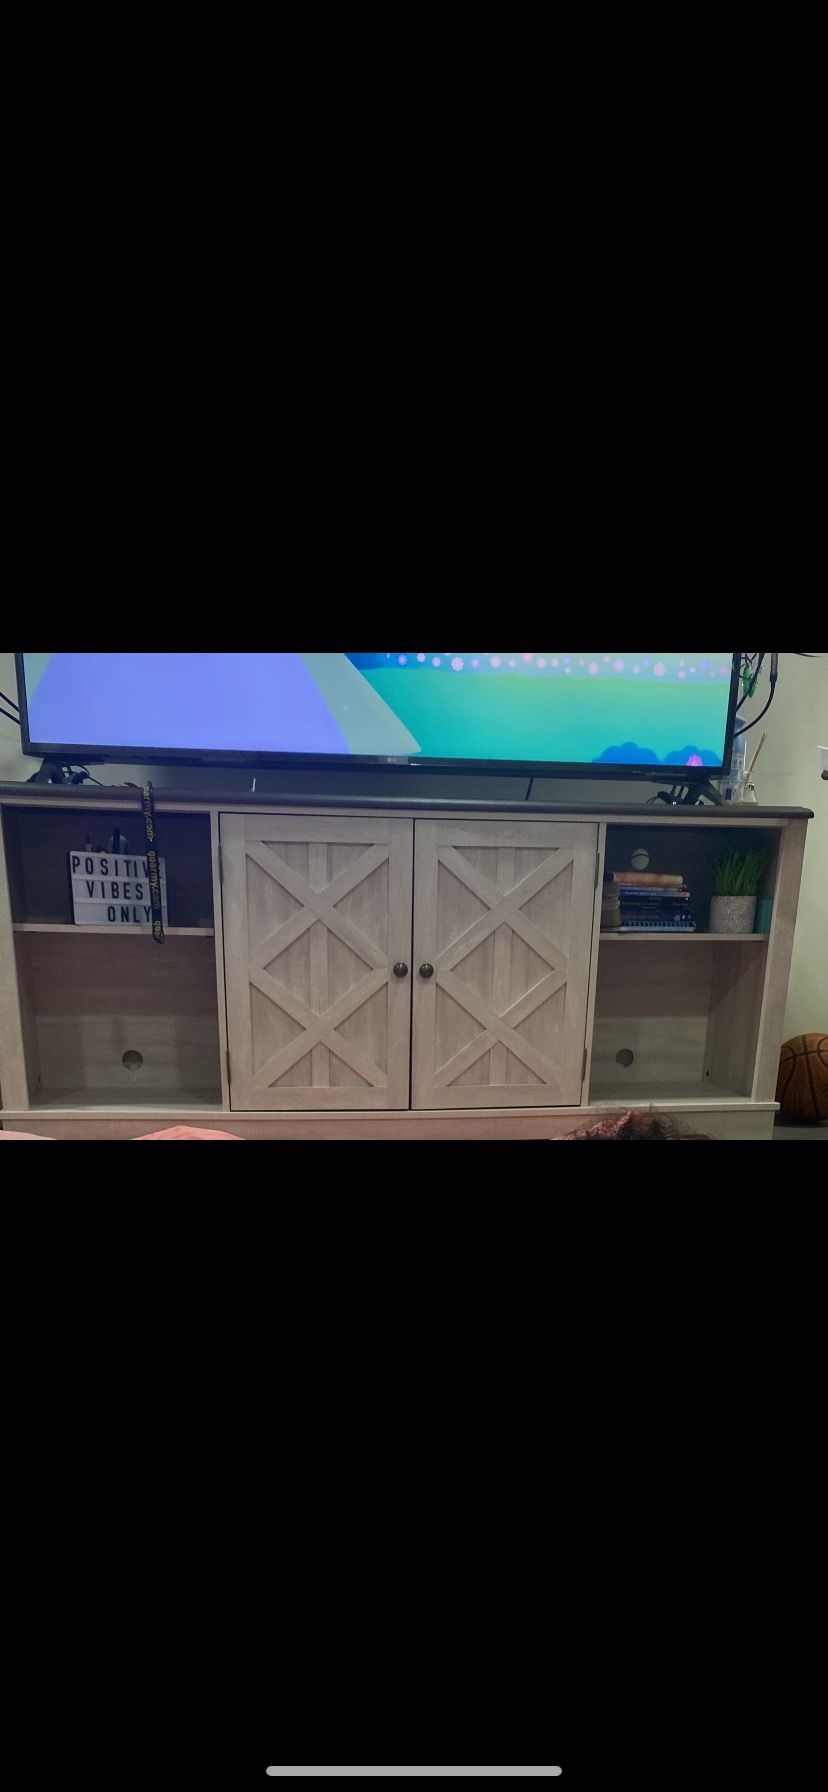 TV Stand For TVs Up To 80”